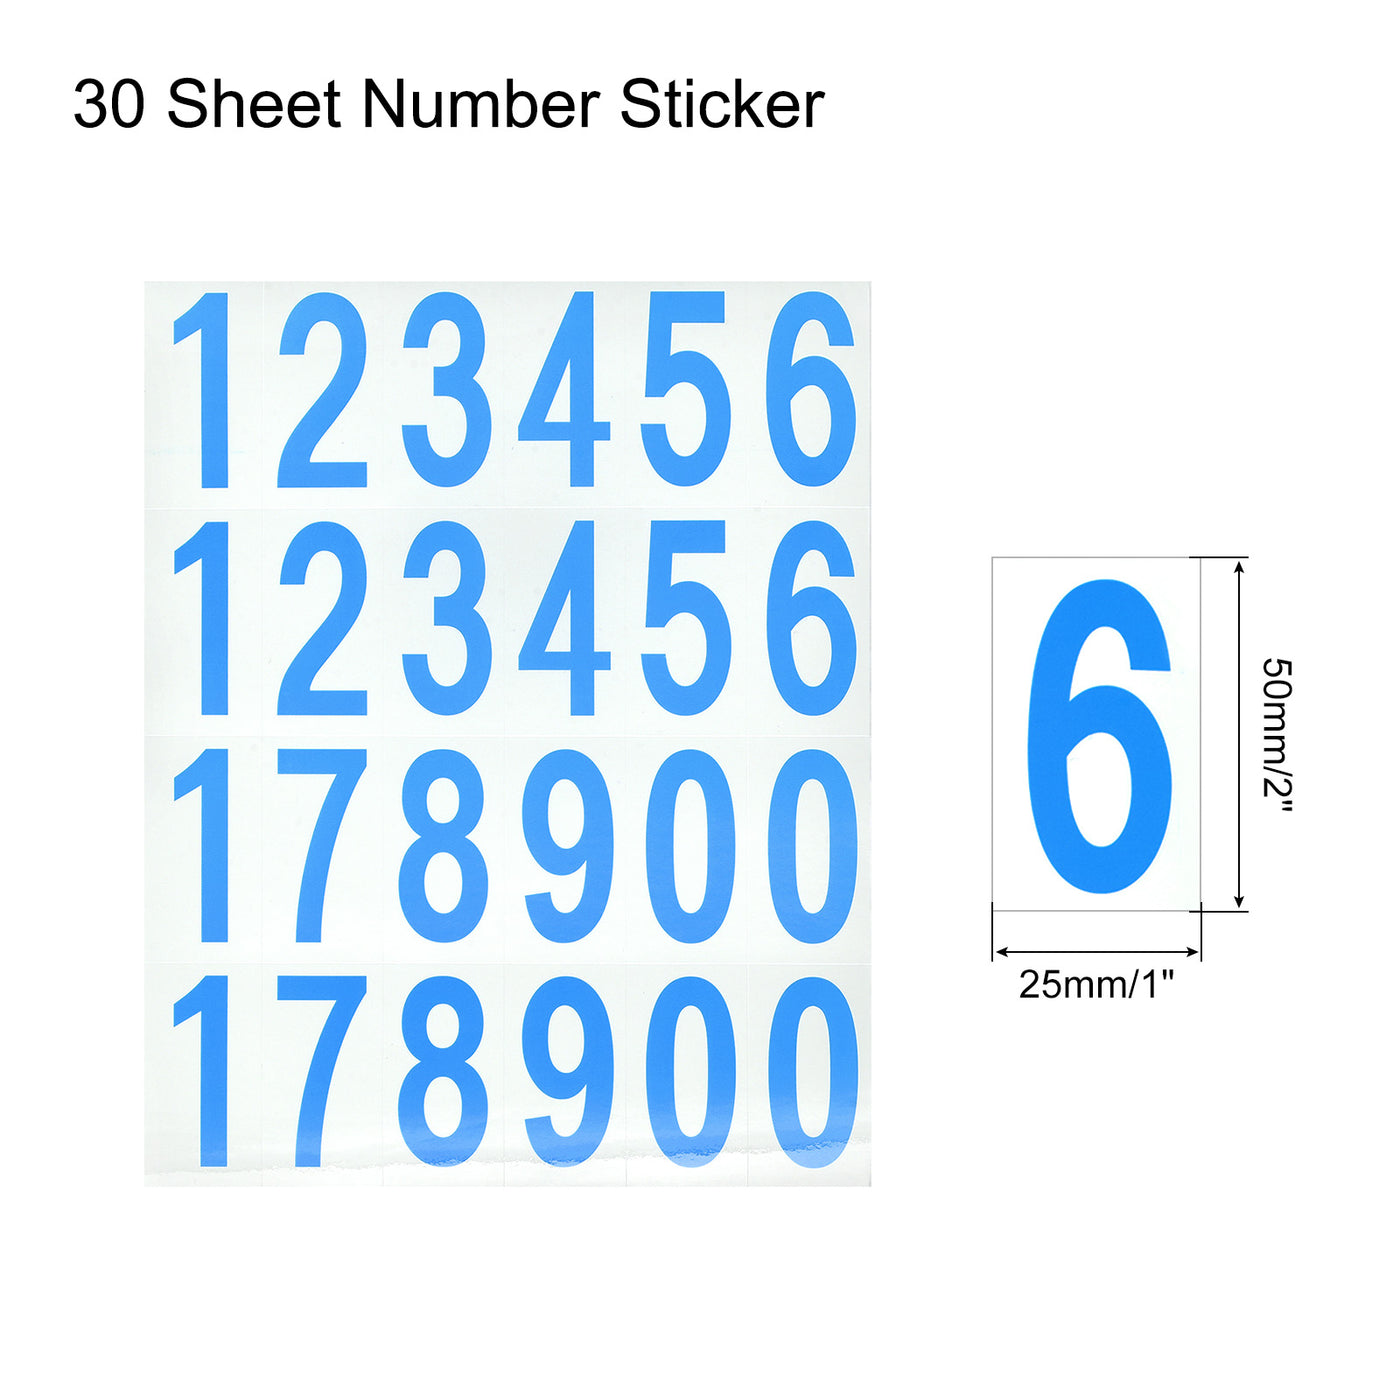 Harfington Number Stickers Mailbox Numbers Self Adhesive 12345178900 50x25mm Blue on White for Residence Mailbox Signs, 30 Sheets(720pcs)